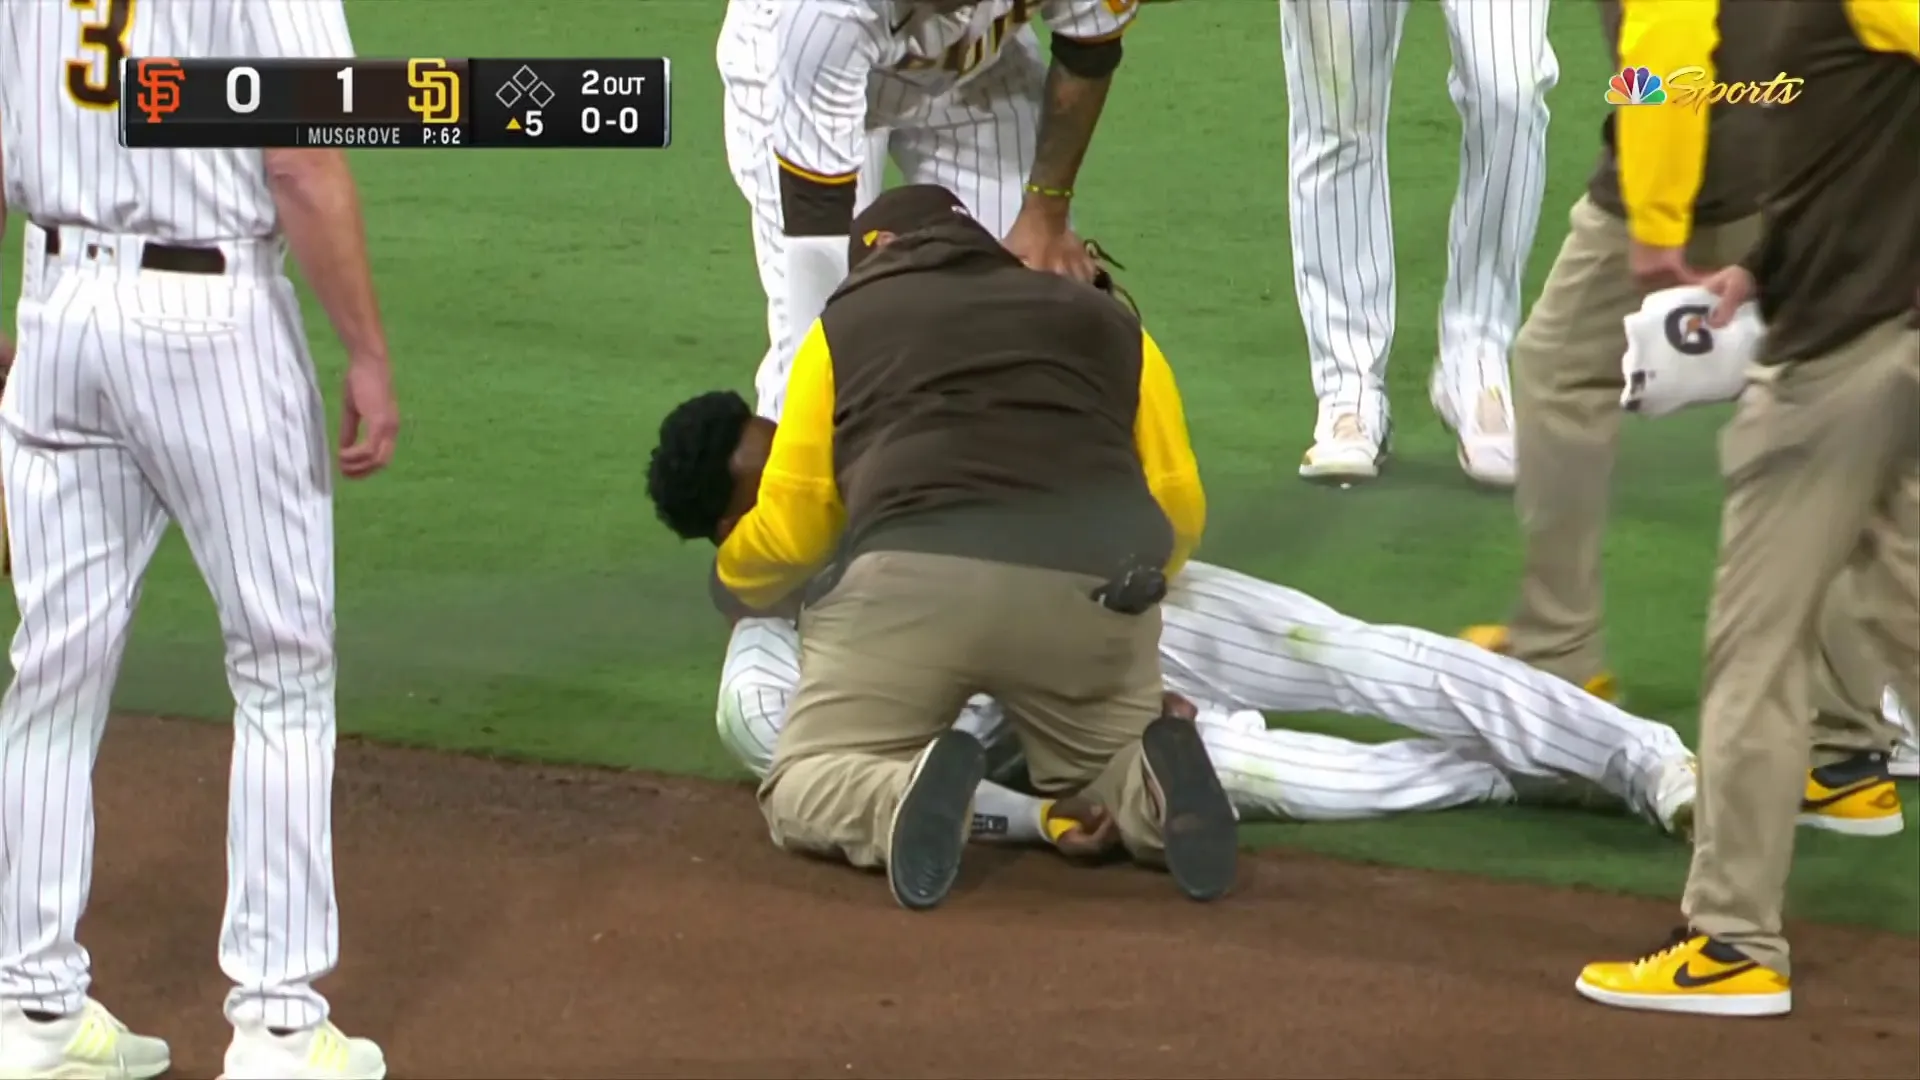 Padres' Profar collapses after collision, taken off on cart